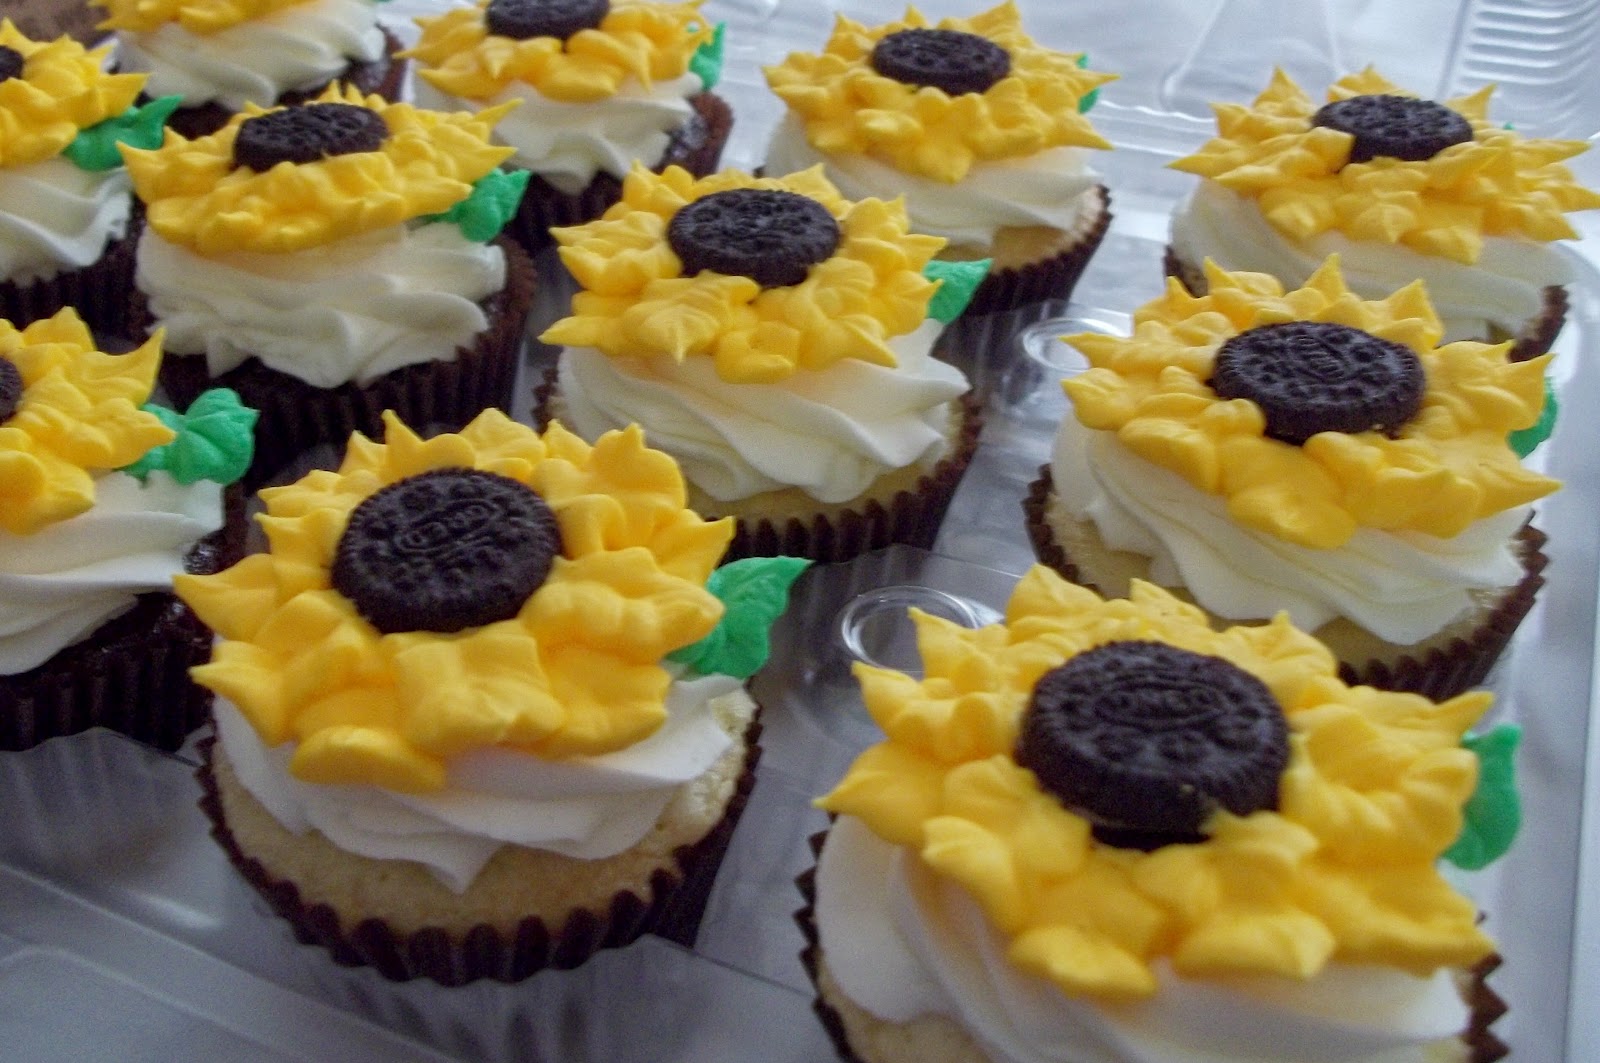 Bridal Shower Cakes with Sunflowers